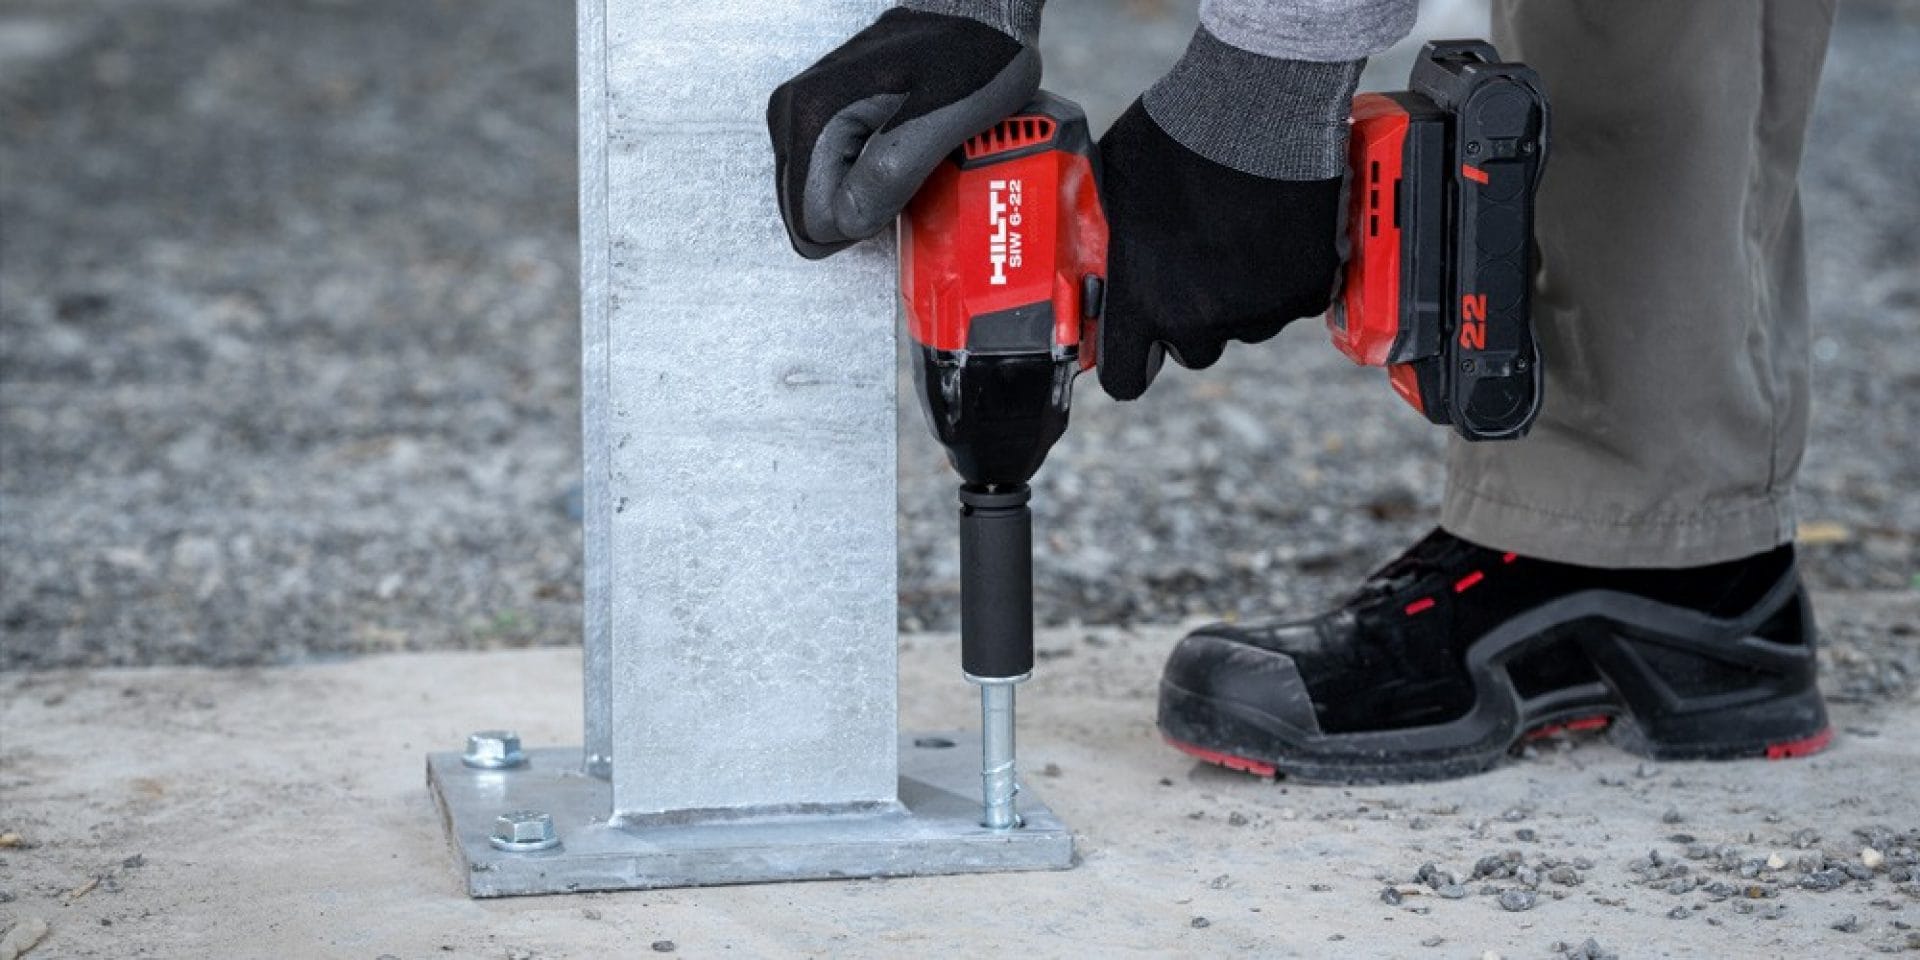 Hilti Nuron SIW 6-22 cordless impact wrench in use